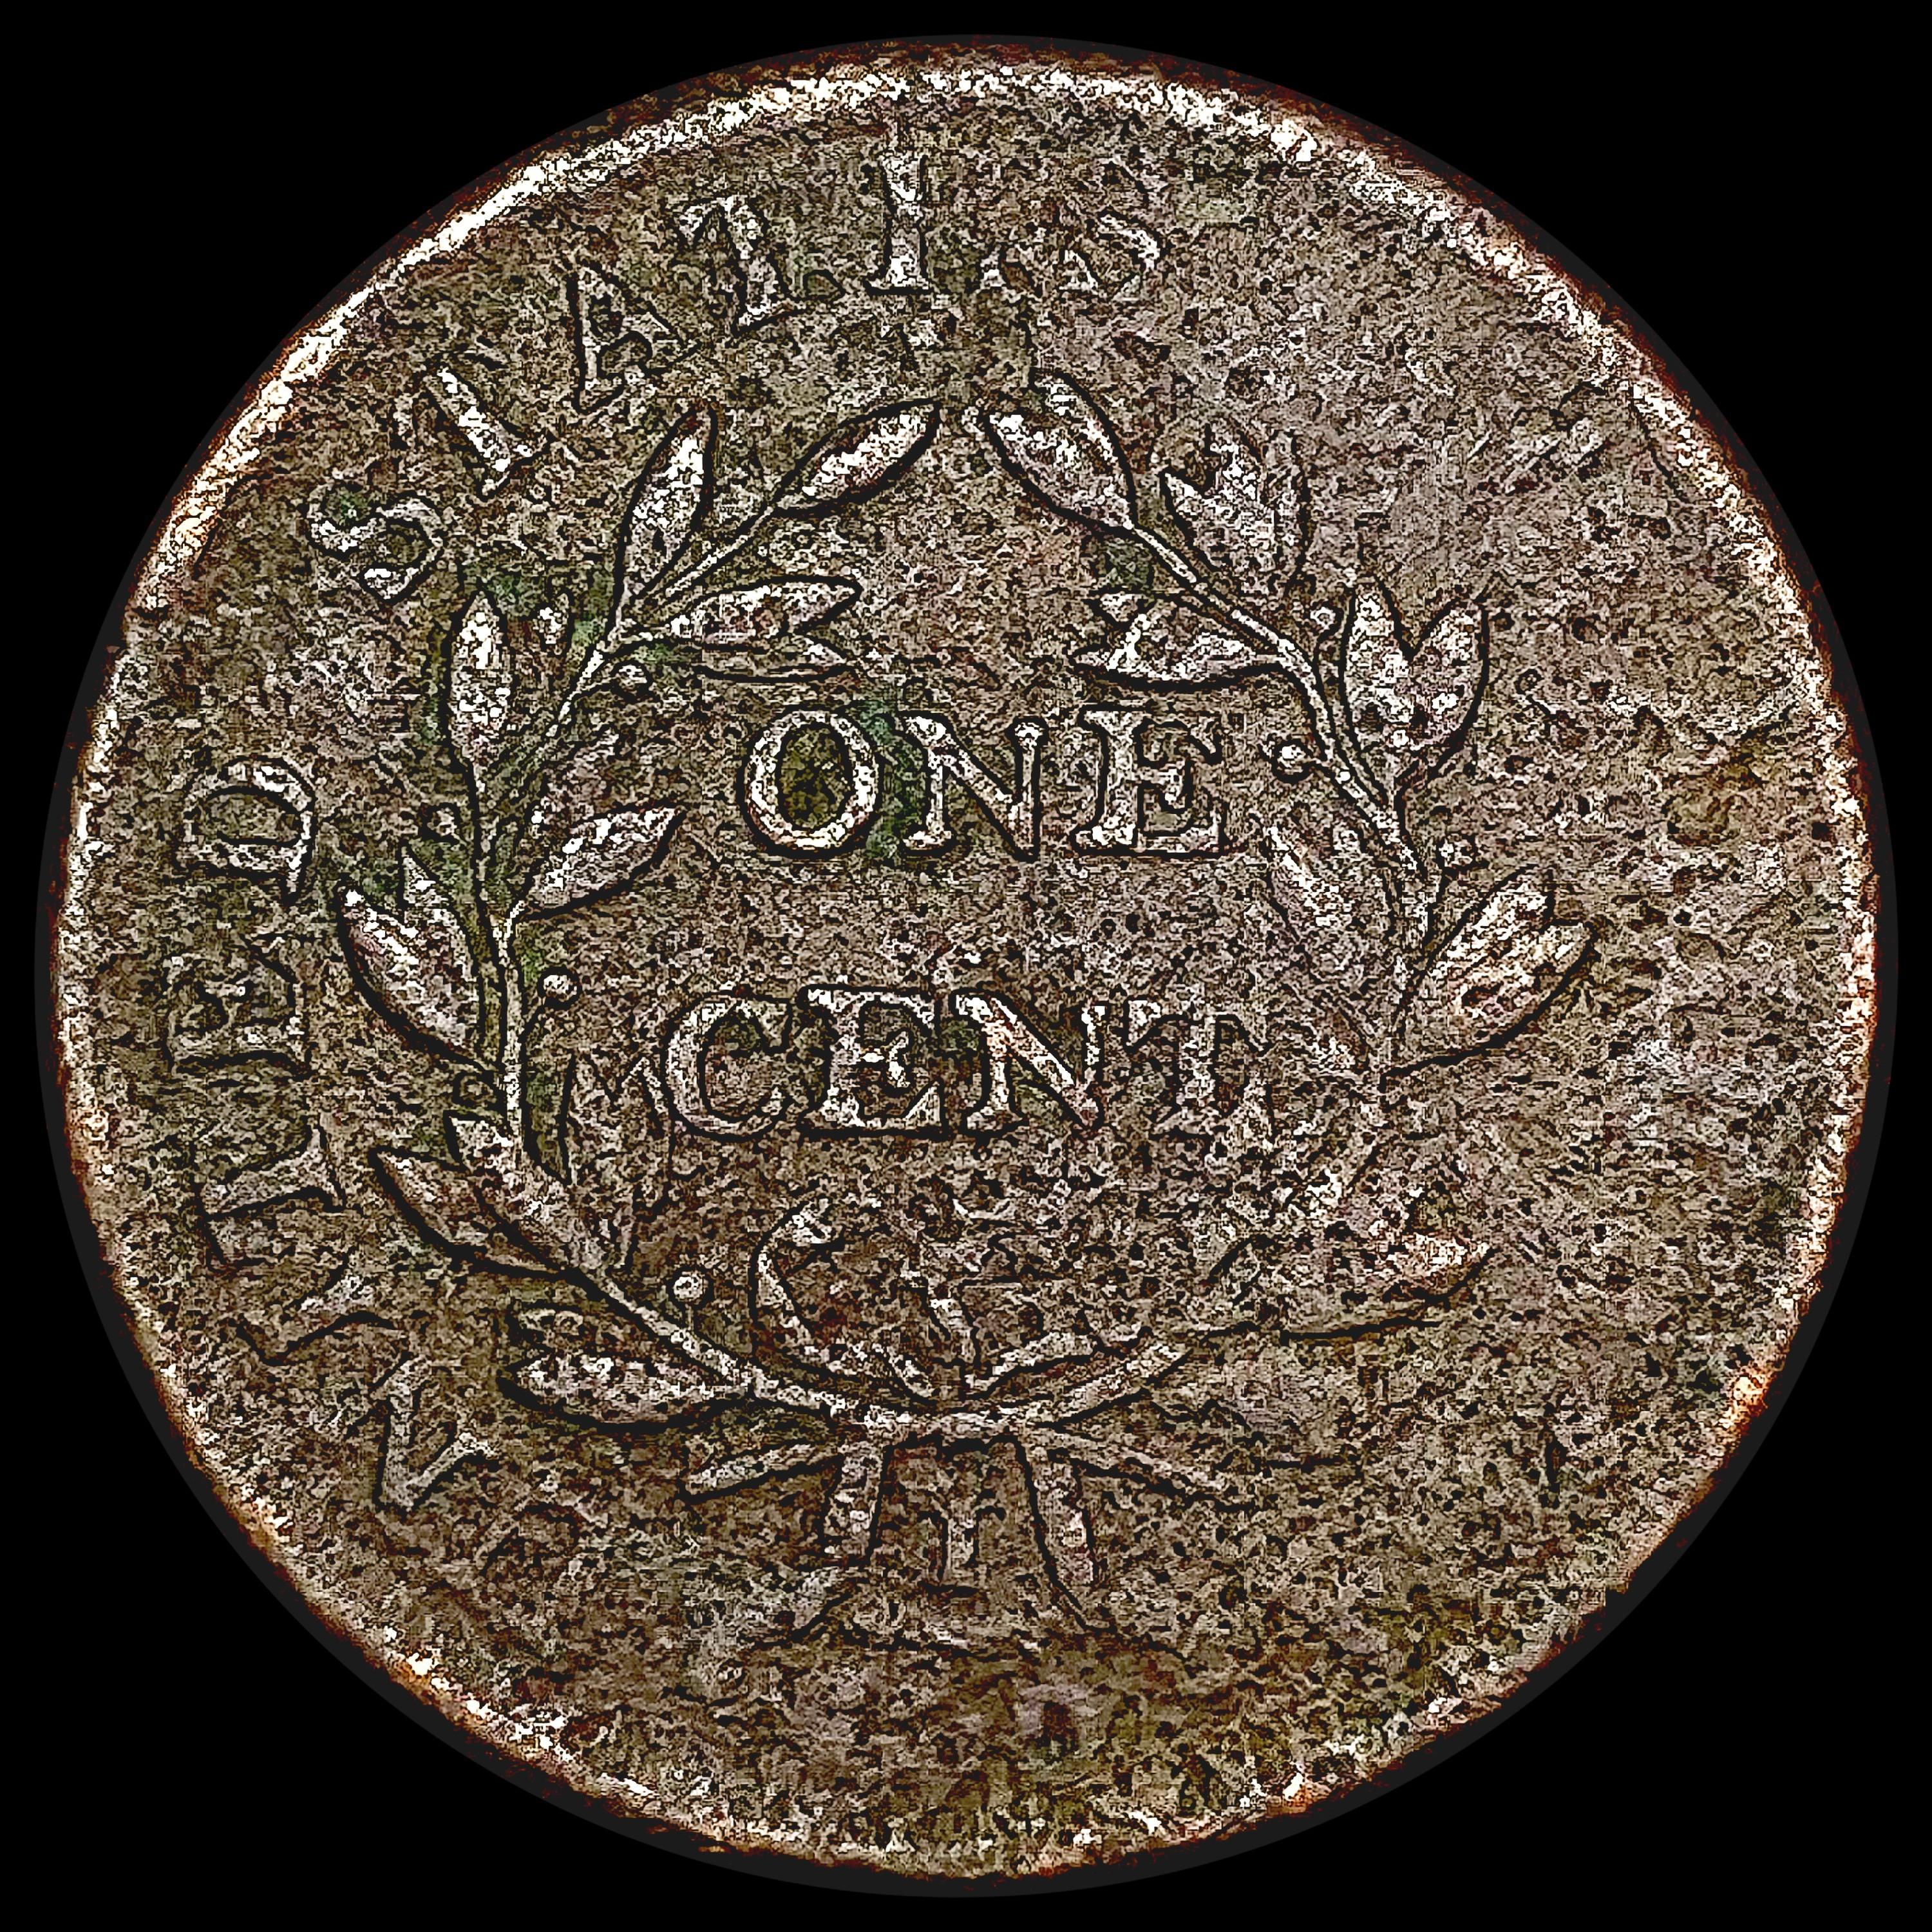 1807/6 Lg 7 SG - 273 Draped Bust Large Cent NICELY